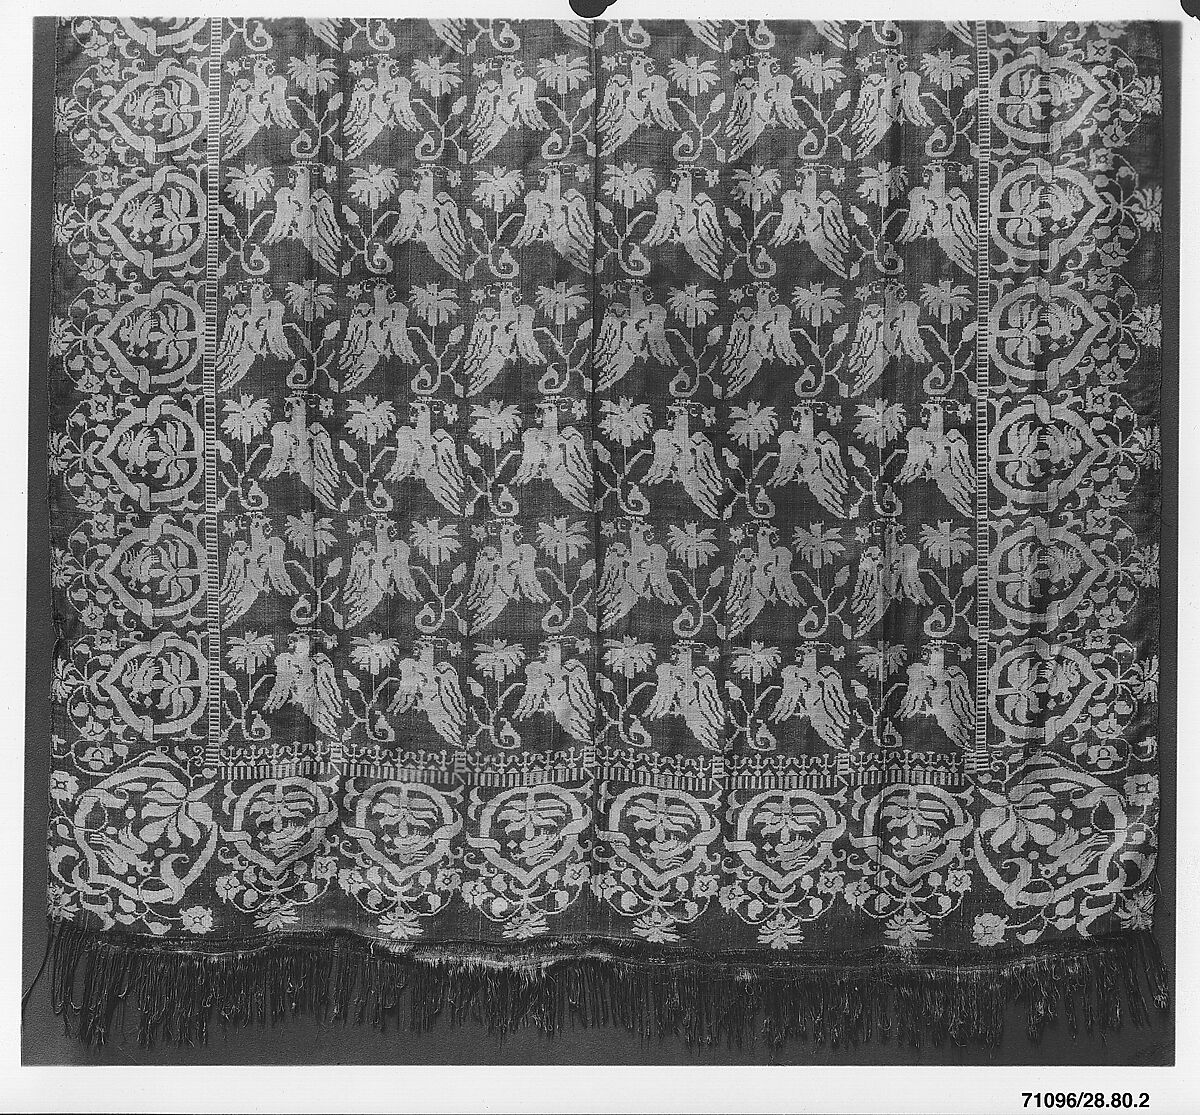 Coverlet or hanging, Silk and metal thread, Italian, Sicily 